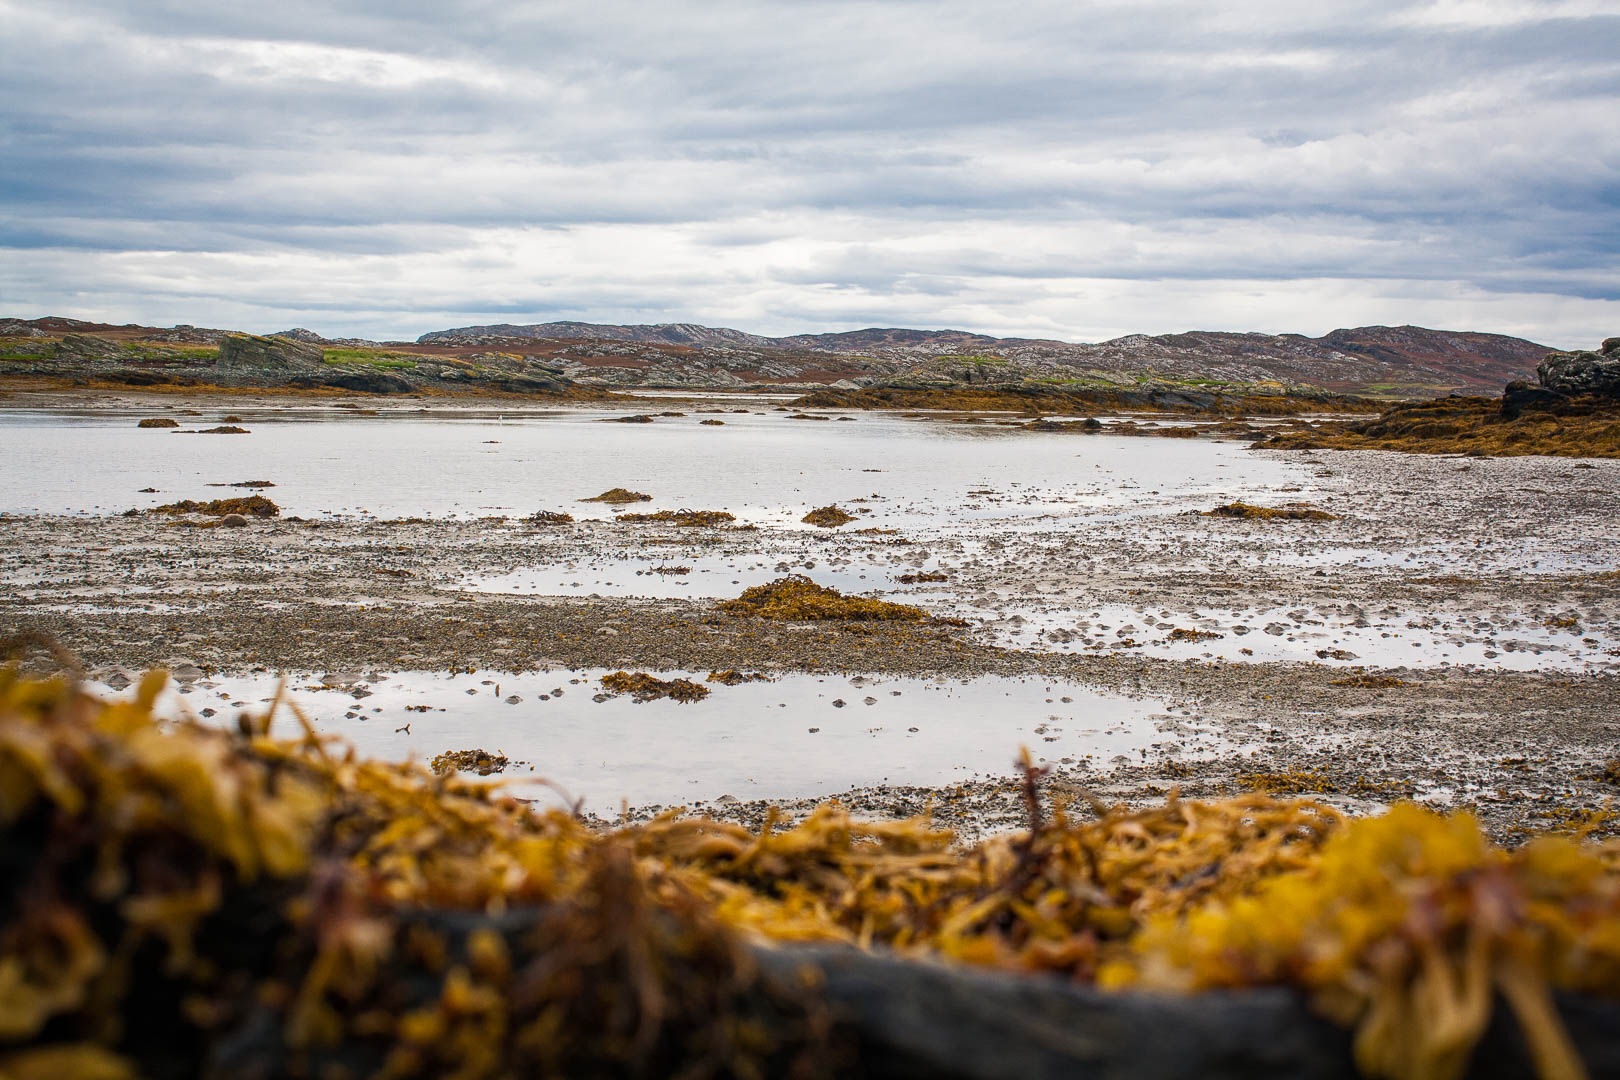 ‘Between the Tides’ – Oransay (Isle of Colonsay)